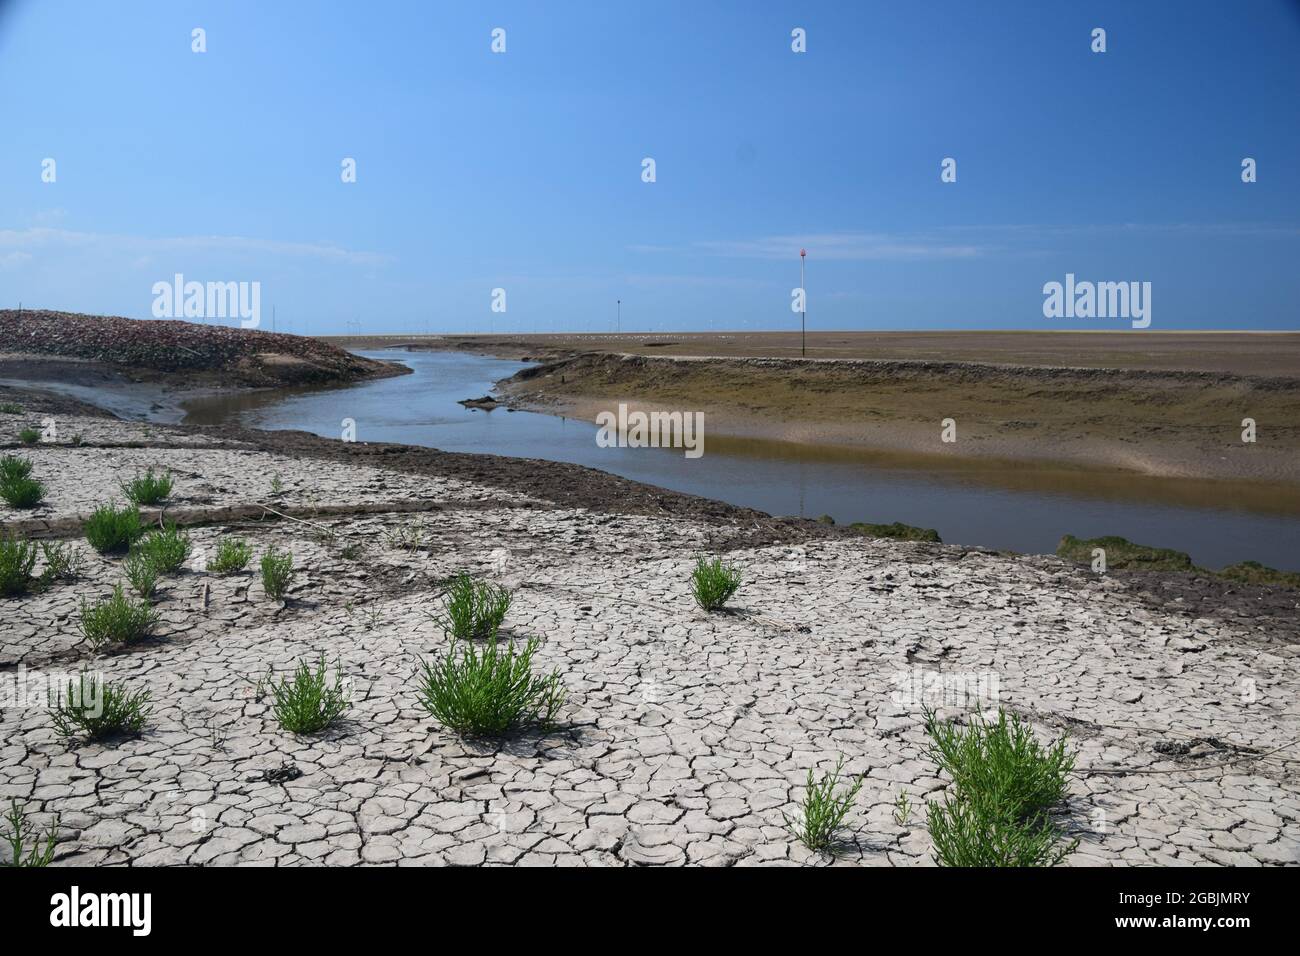 The tide is out on the Mersey estuary shore showing exposed sand banks, sea birds, river Alt tributary under blue sky's and summer sunlight. Stock Photo